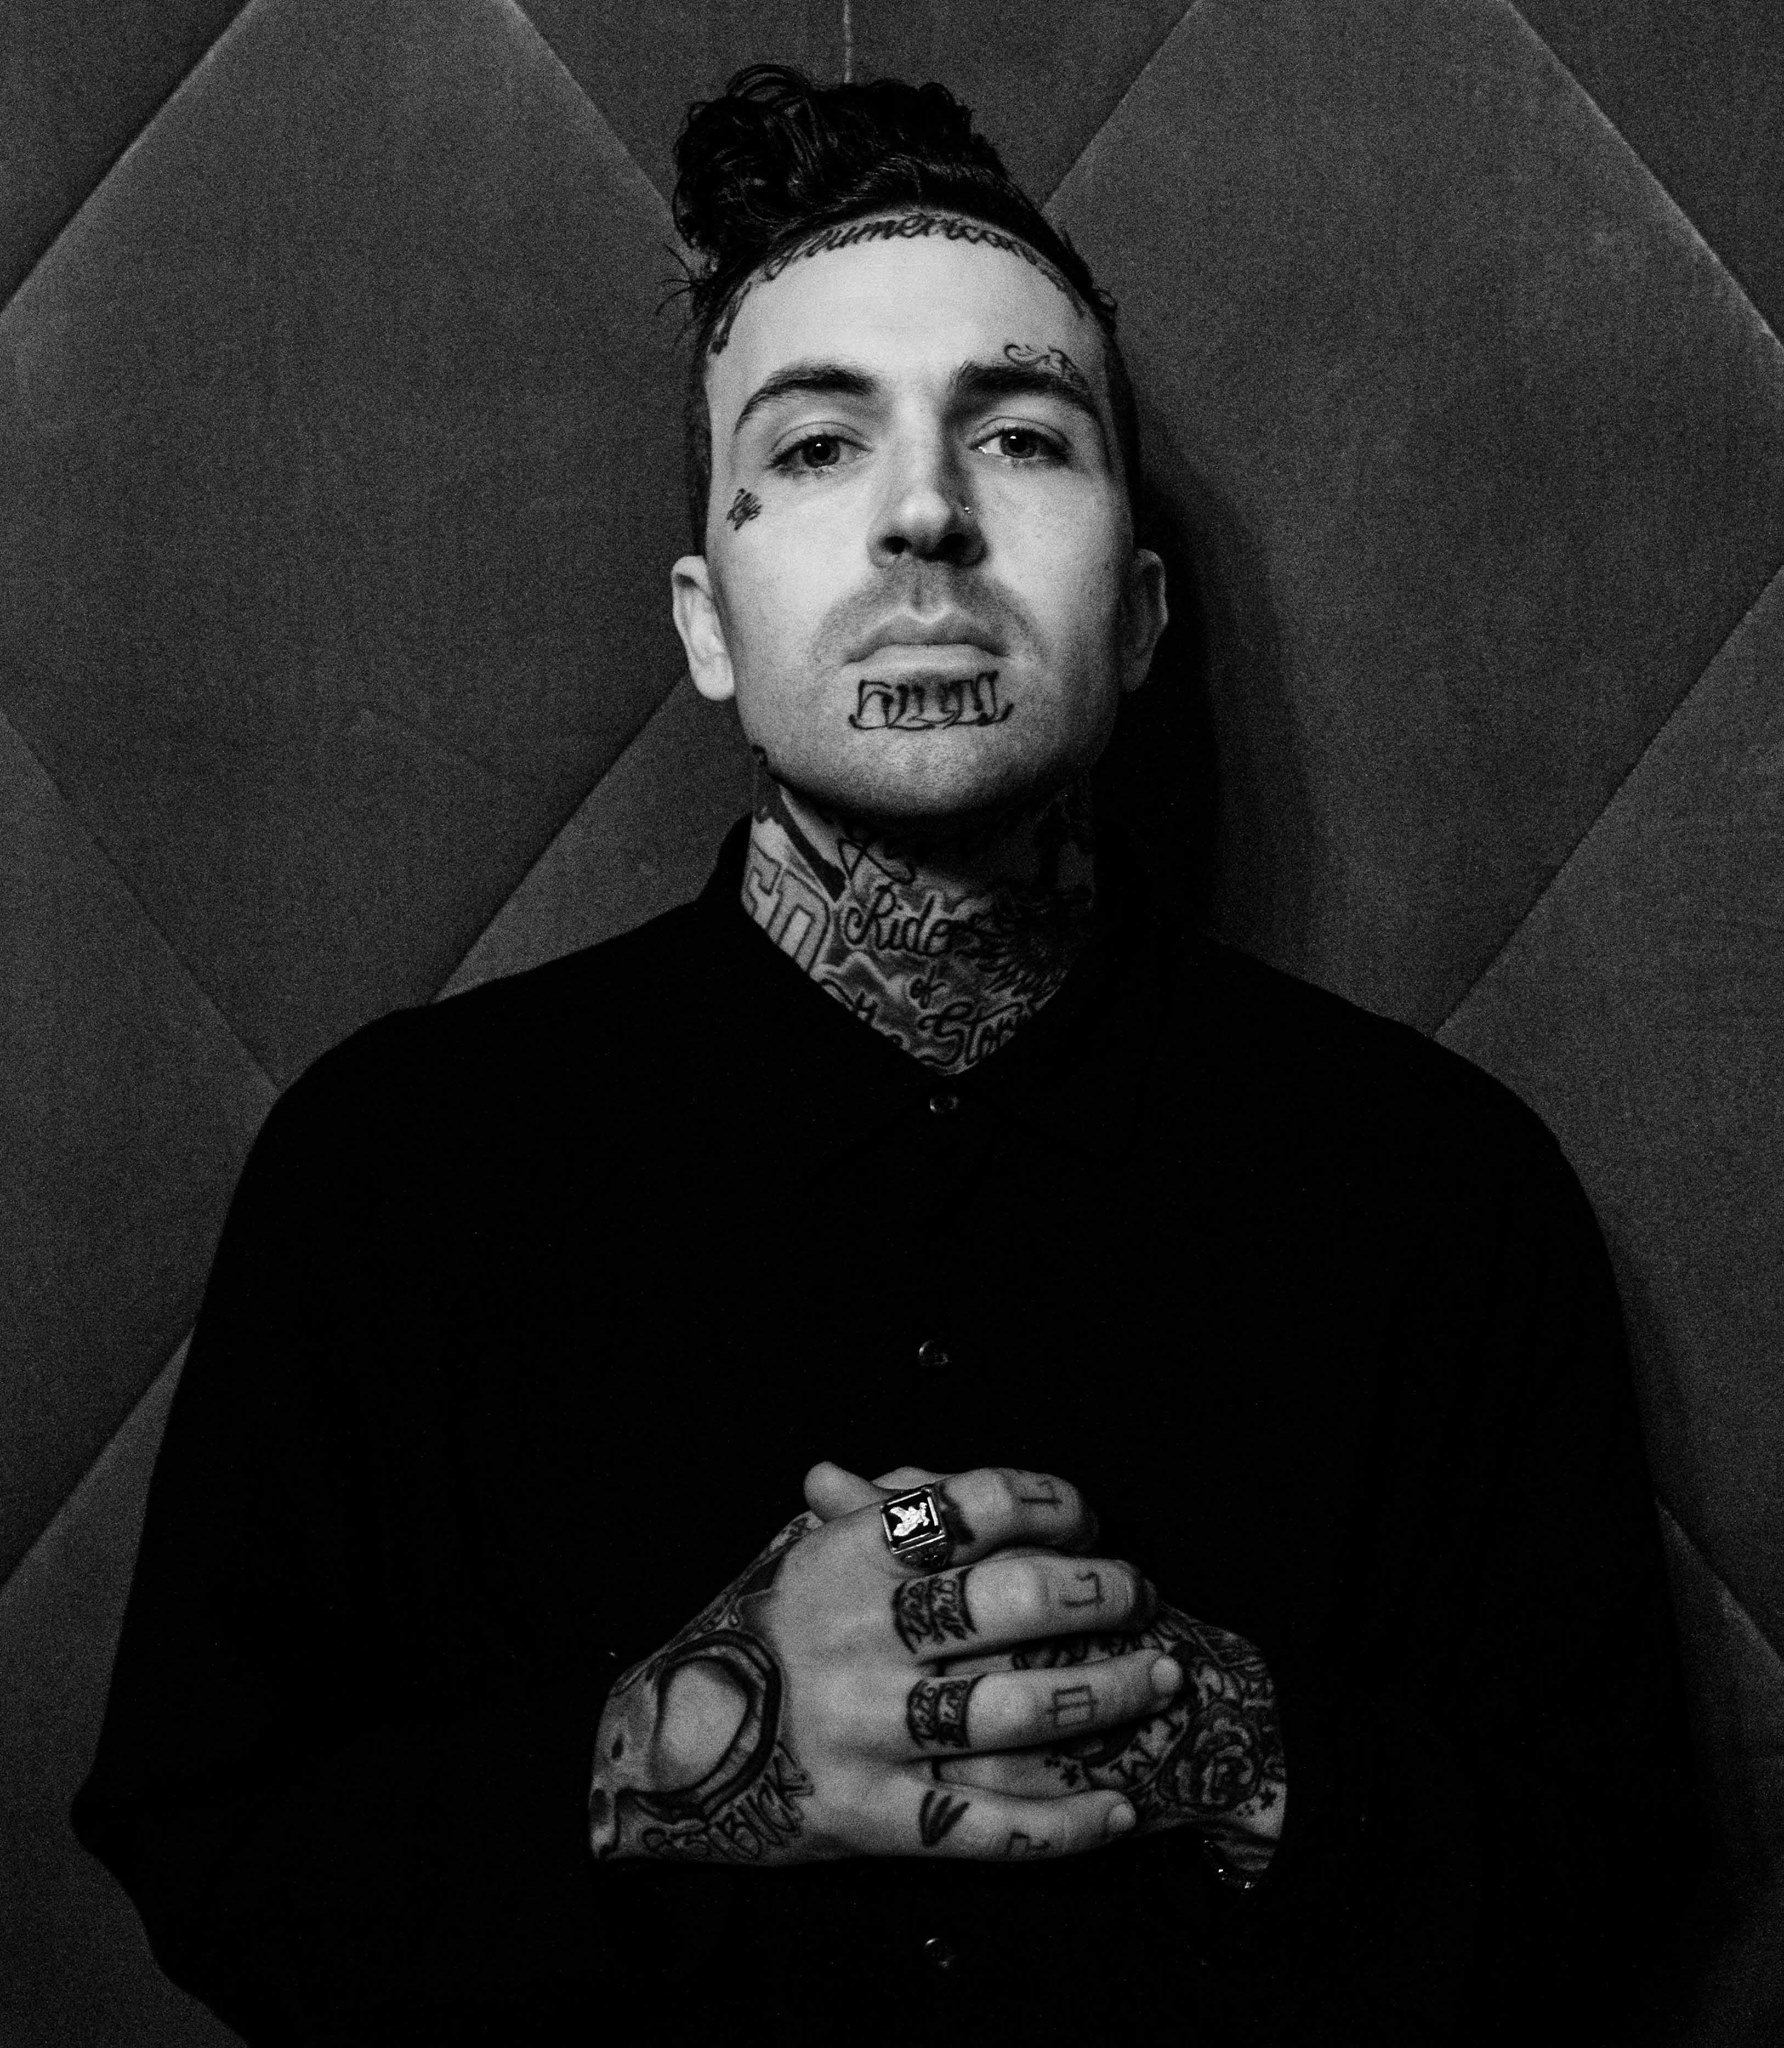 Yelawolf – To Whom It May Concern